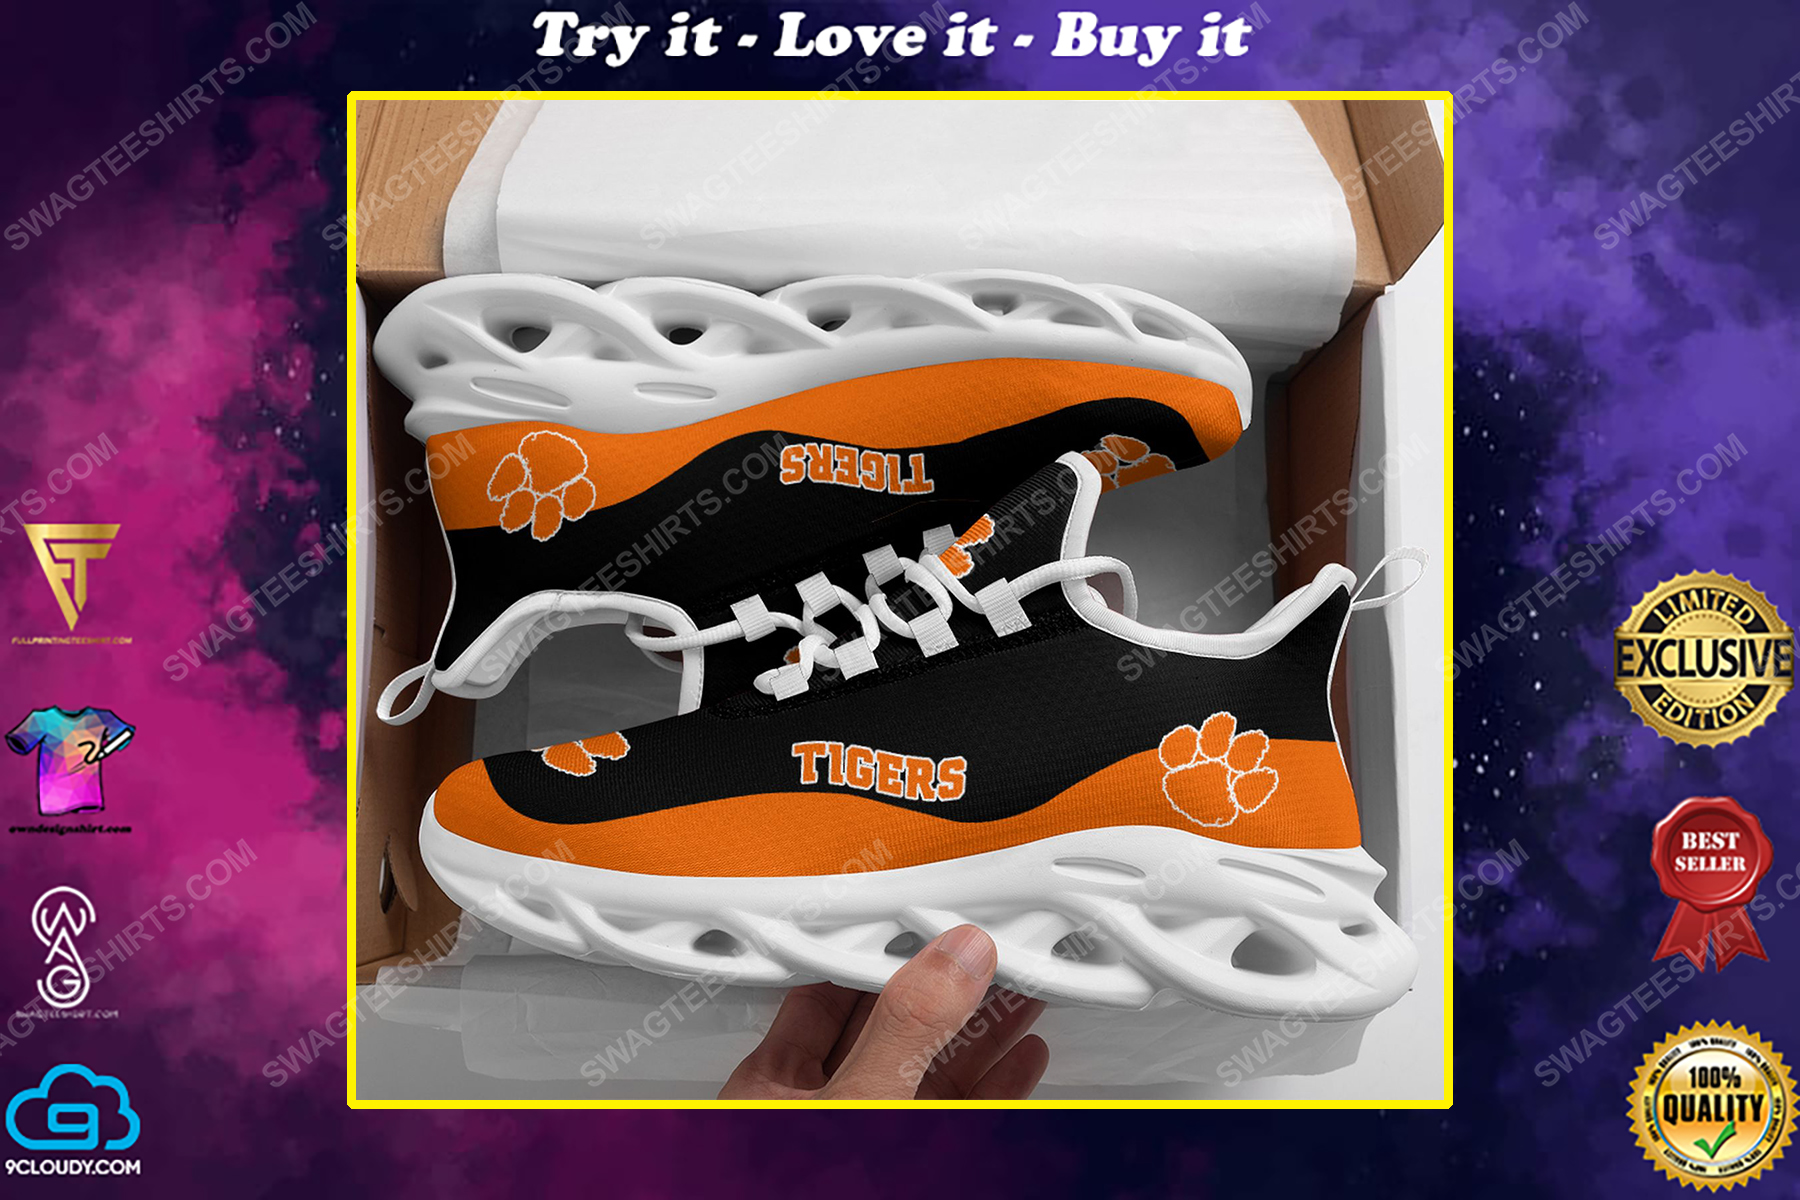 The clemson tigers football team max soul shoes